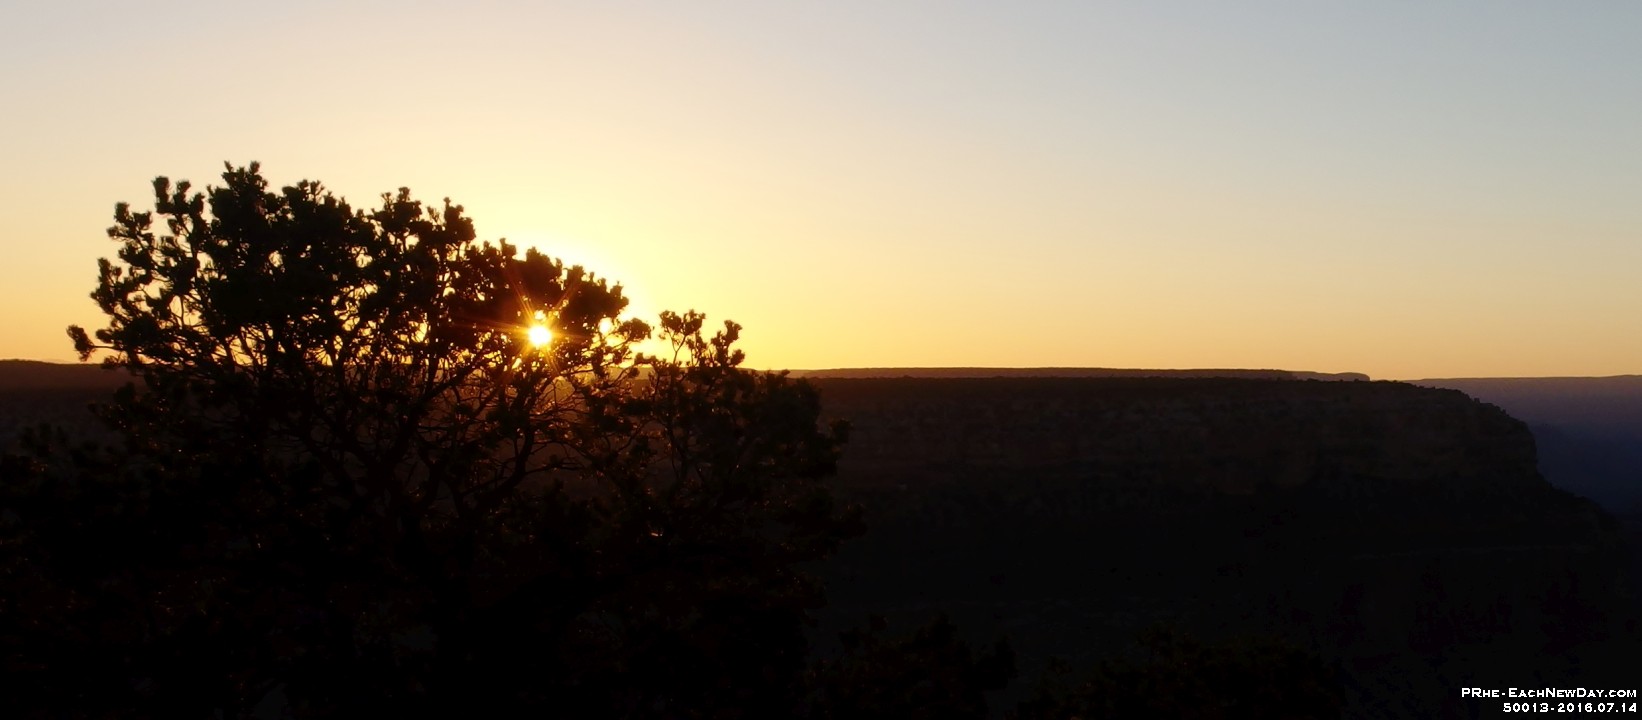 50013CrExShDe - Out to Hermit's Rest, Sunset, Hermit's Rest, Grand Canyon